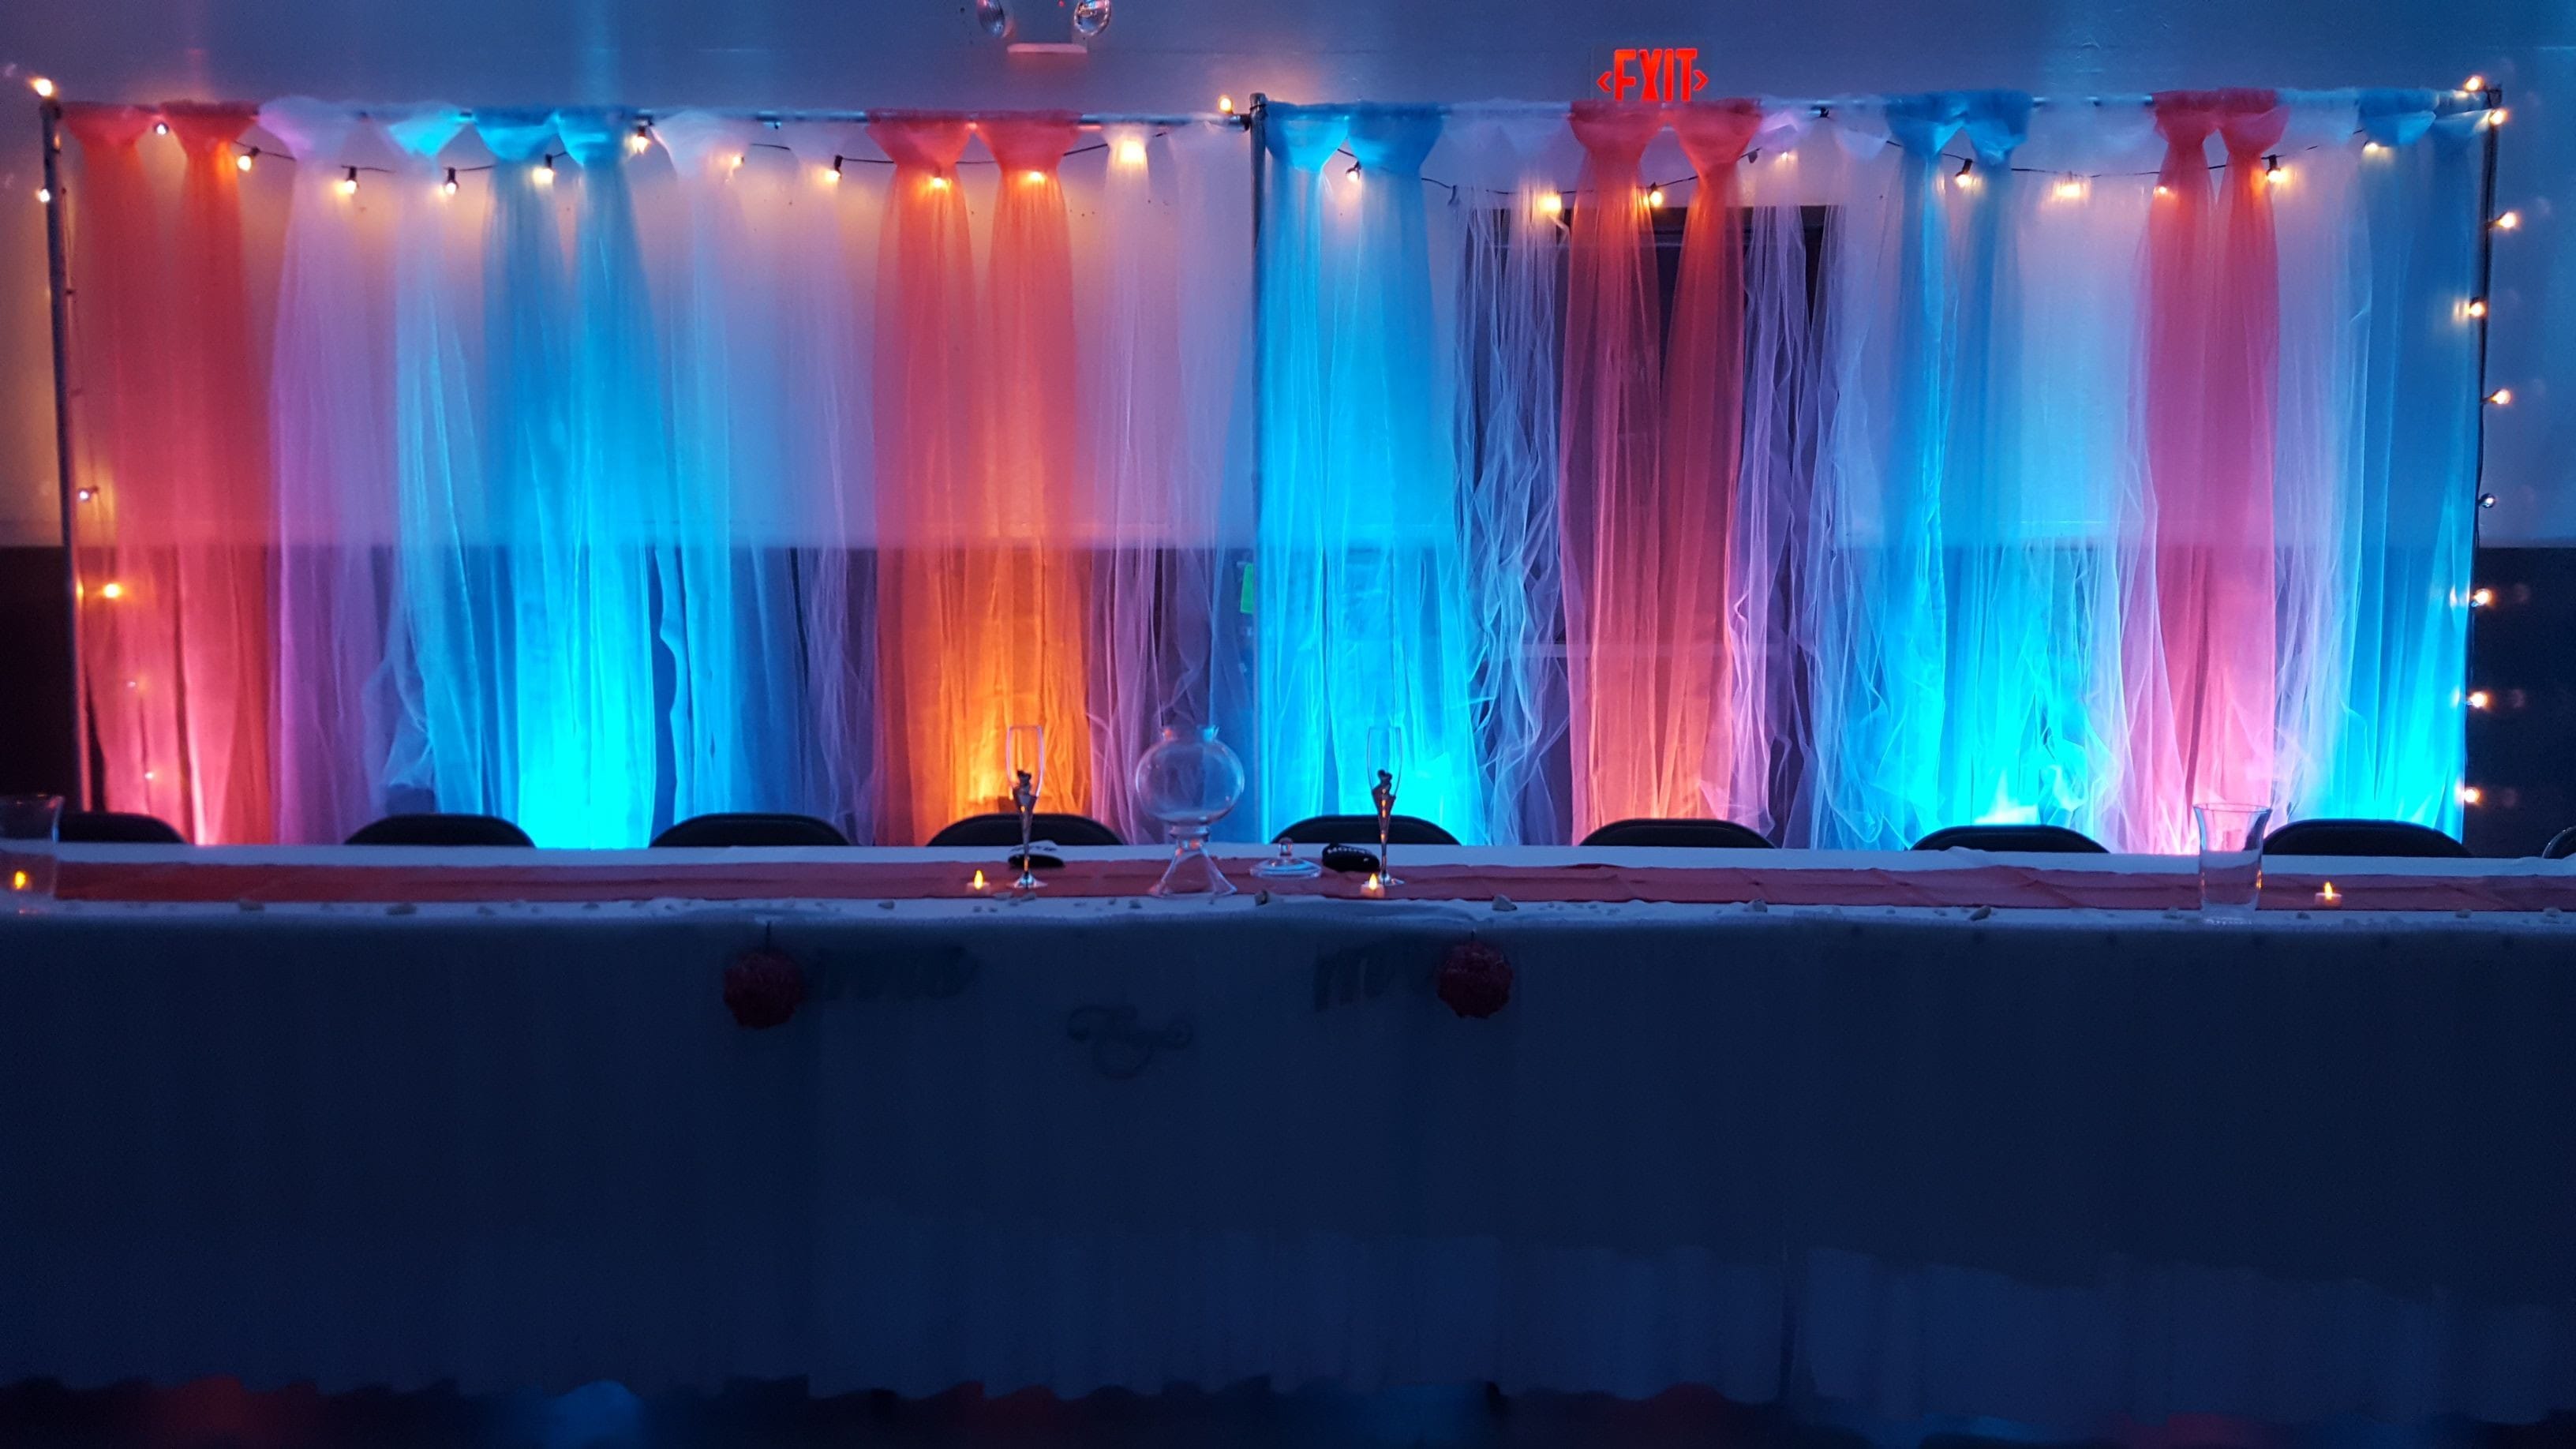 Superior Curling Club.
Up lighting in teal and coral for a wedding.